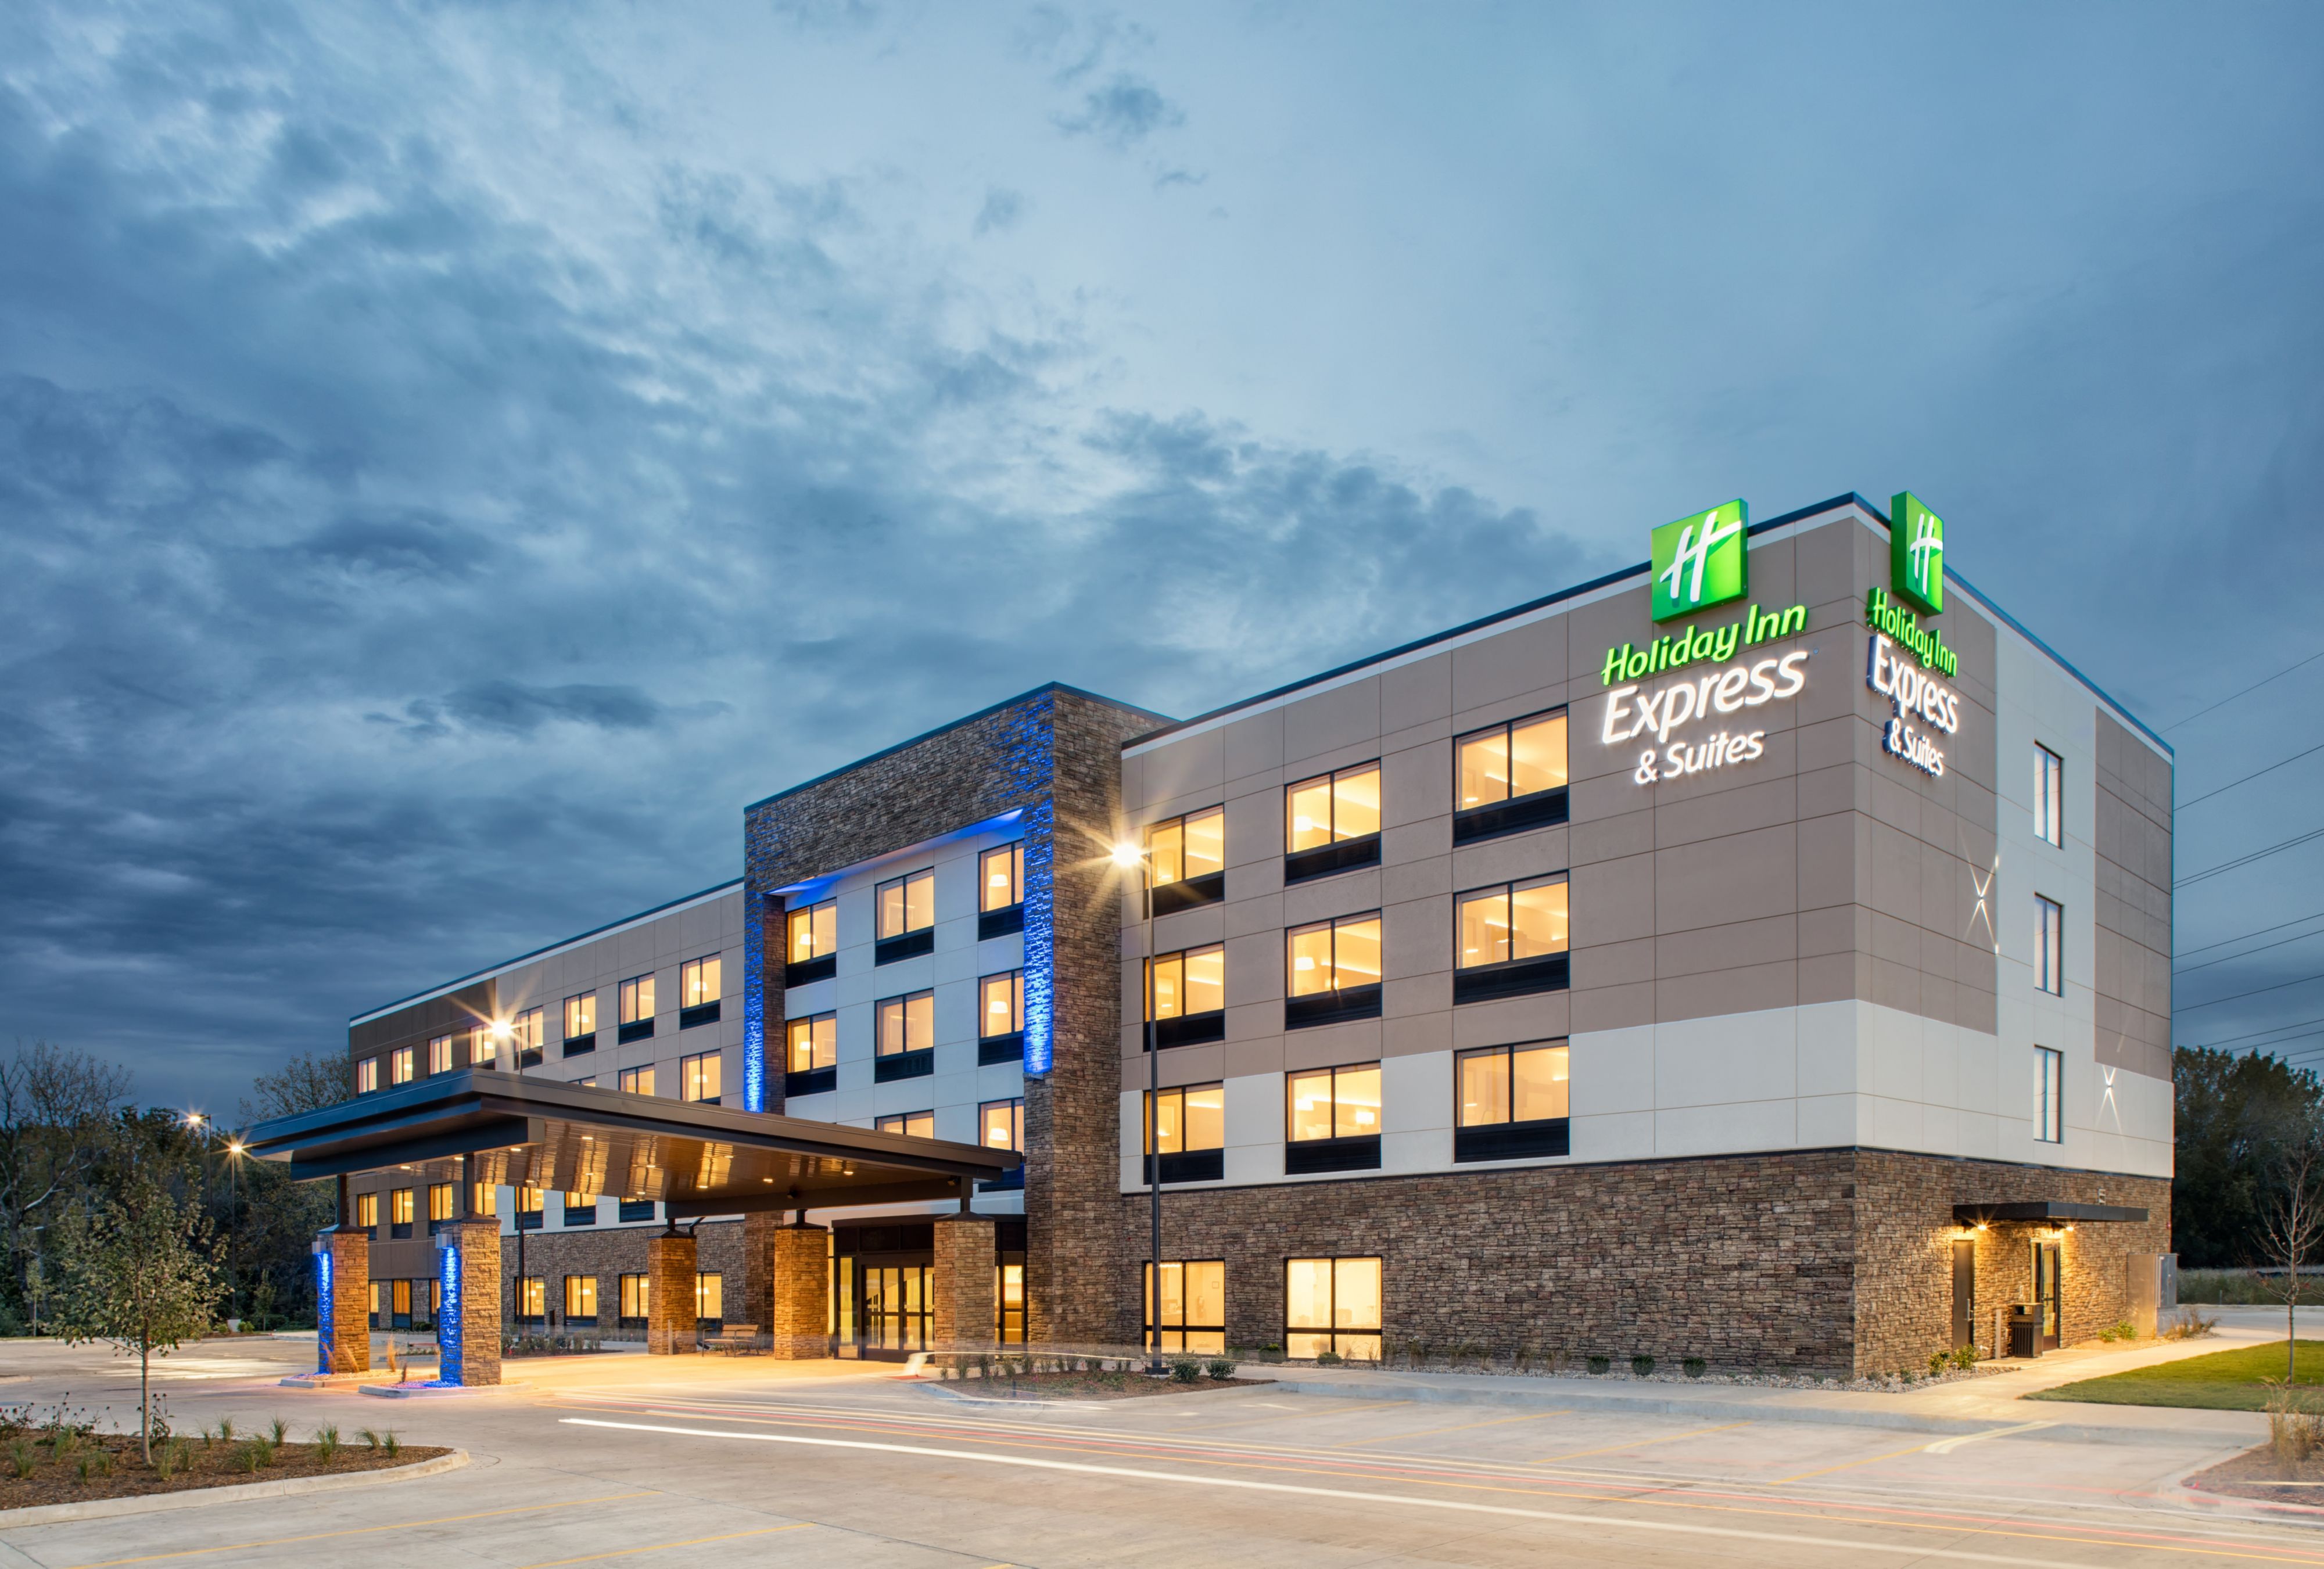 Holiday Inn Express & Suites East Greenbush(Albany-Skyline) Coupons Rensselaer NY near me | 8coupons